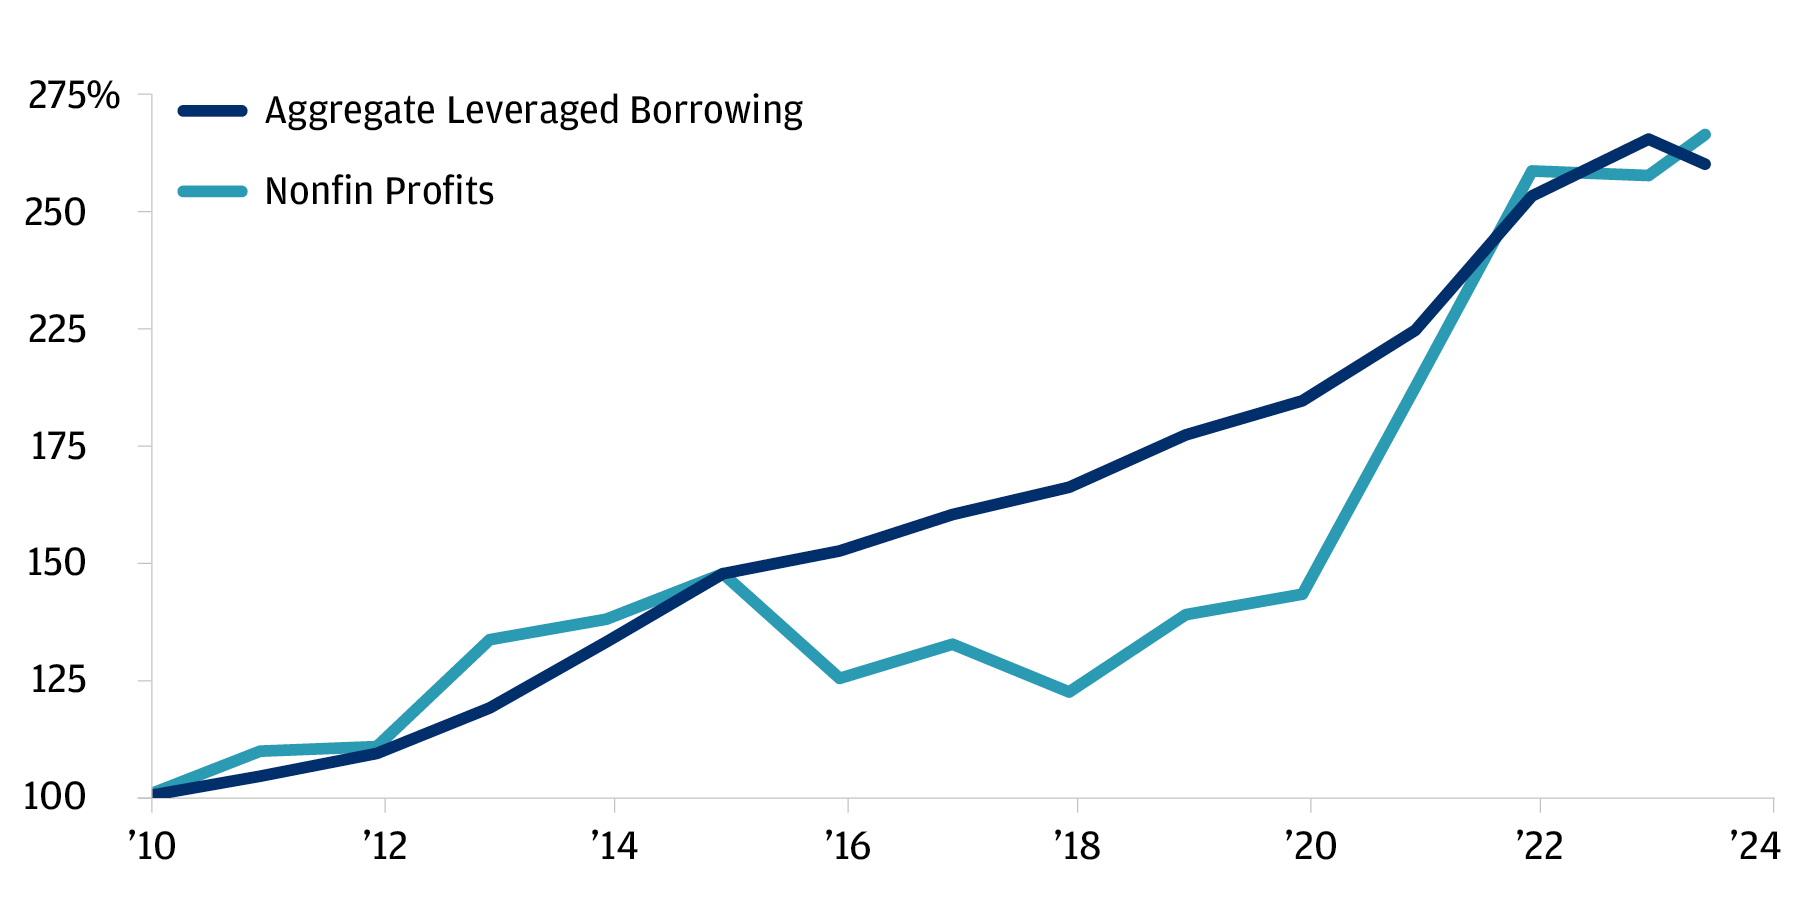 This shows growth since 2010 in aggregate leveraged financial debt outstanding (the sum of North American direct lending invested capital, total domestic high yield par value, and total domestic leveraged loan par value) and nonfinancial corporate profits.